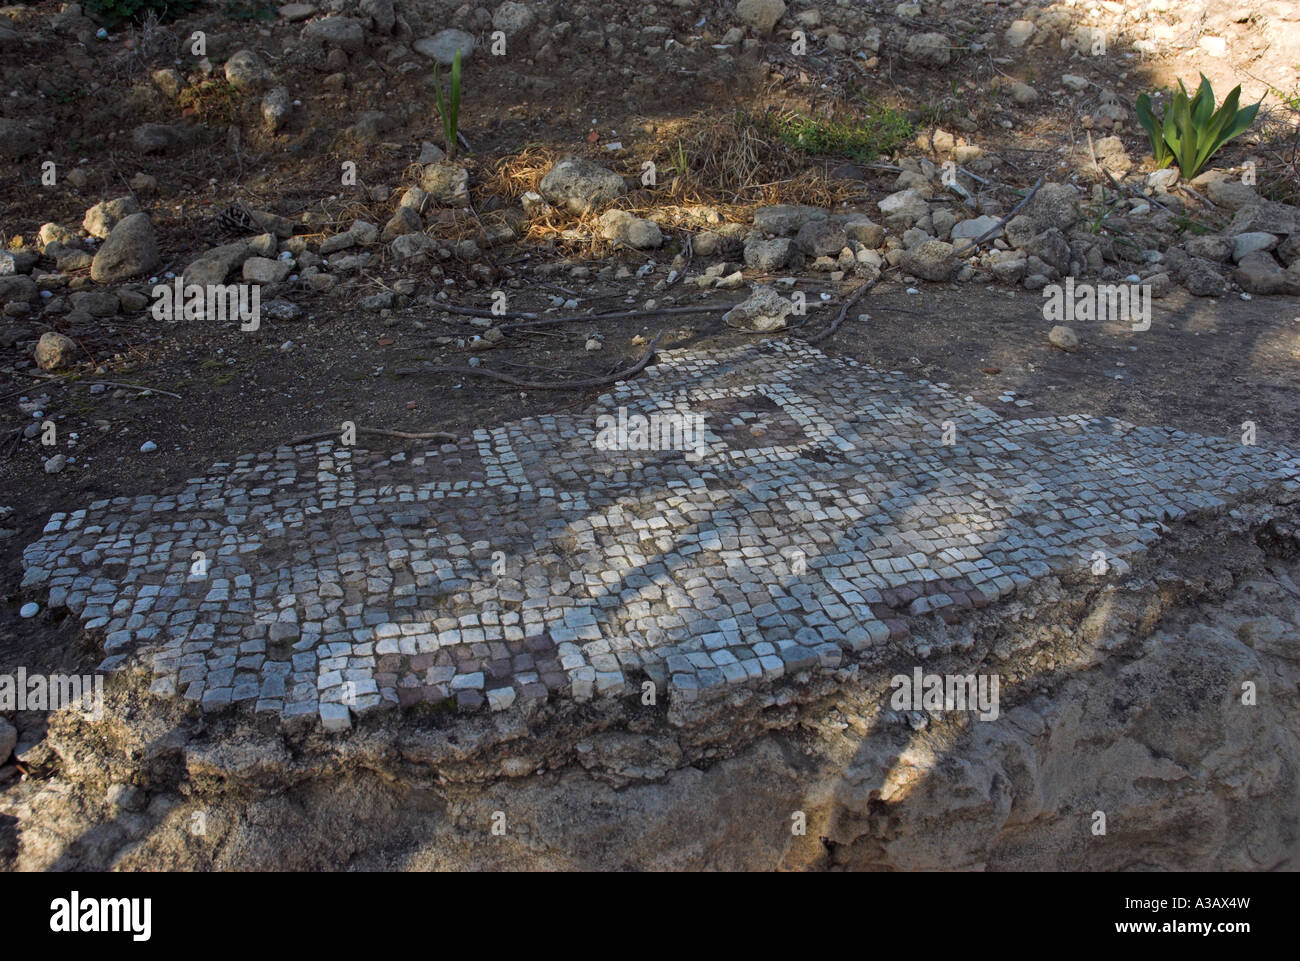 Cyprus. Roman mosaic, archaeological site off Leoforos apostolou pavlou, Paphos Pafos. Archaeology seems to be scattered all over the place. Stock Photo